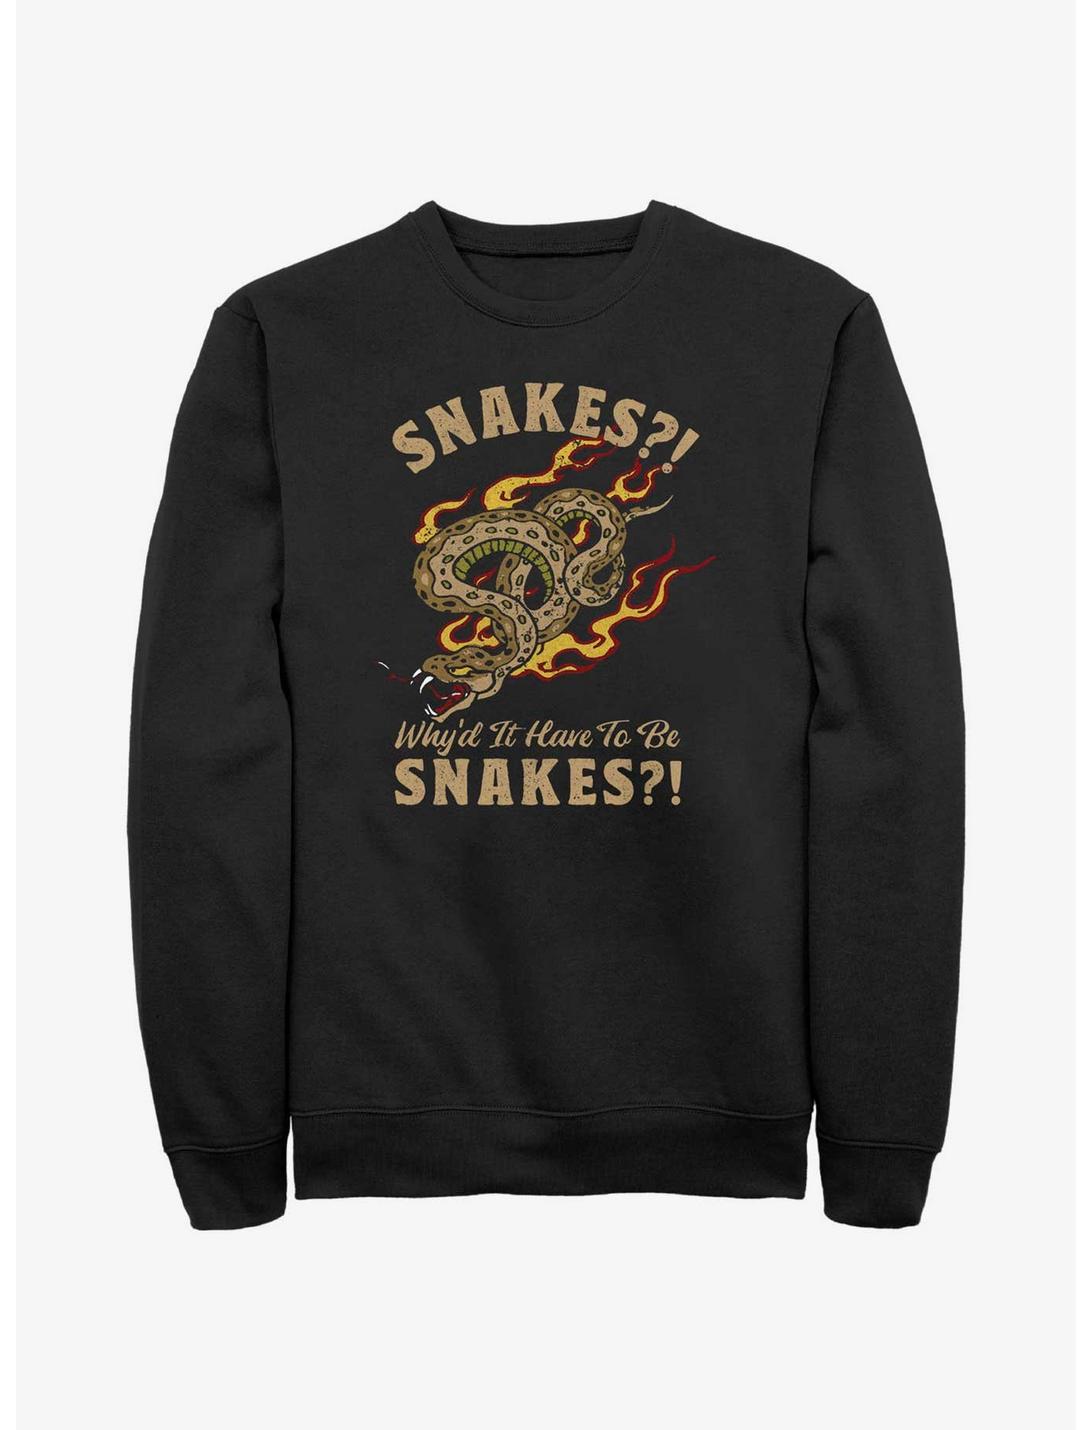 Indiana Jones Why'd It Have To Be Snakes Sweatshirt, BLACK, hi-res